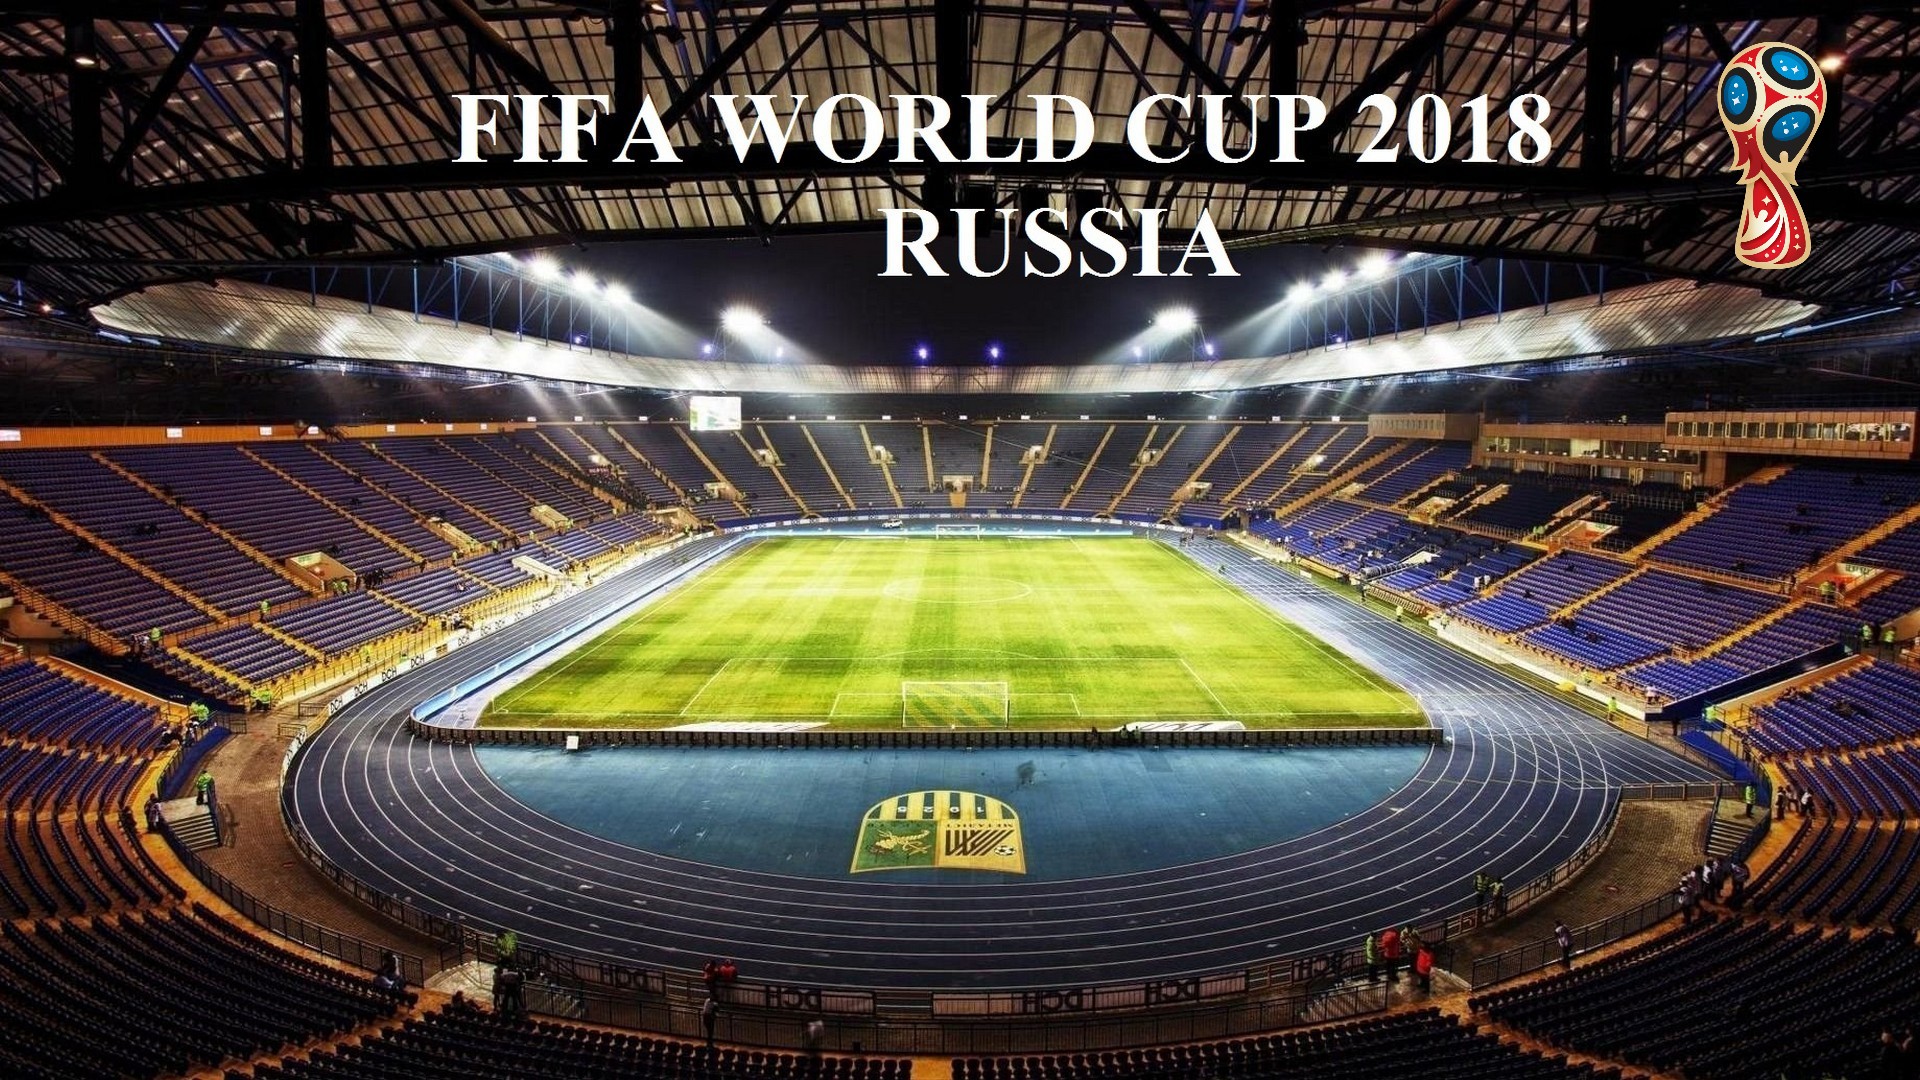 Wallpaper Desktop World Cup Russia HD With Resolution 1920X1080 pixel. You can make this wallpaper for your Mac or Windows Desktop Background, iPhone, Android or Tablet and another Smartphone device for free